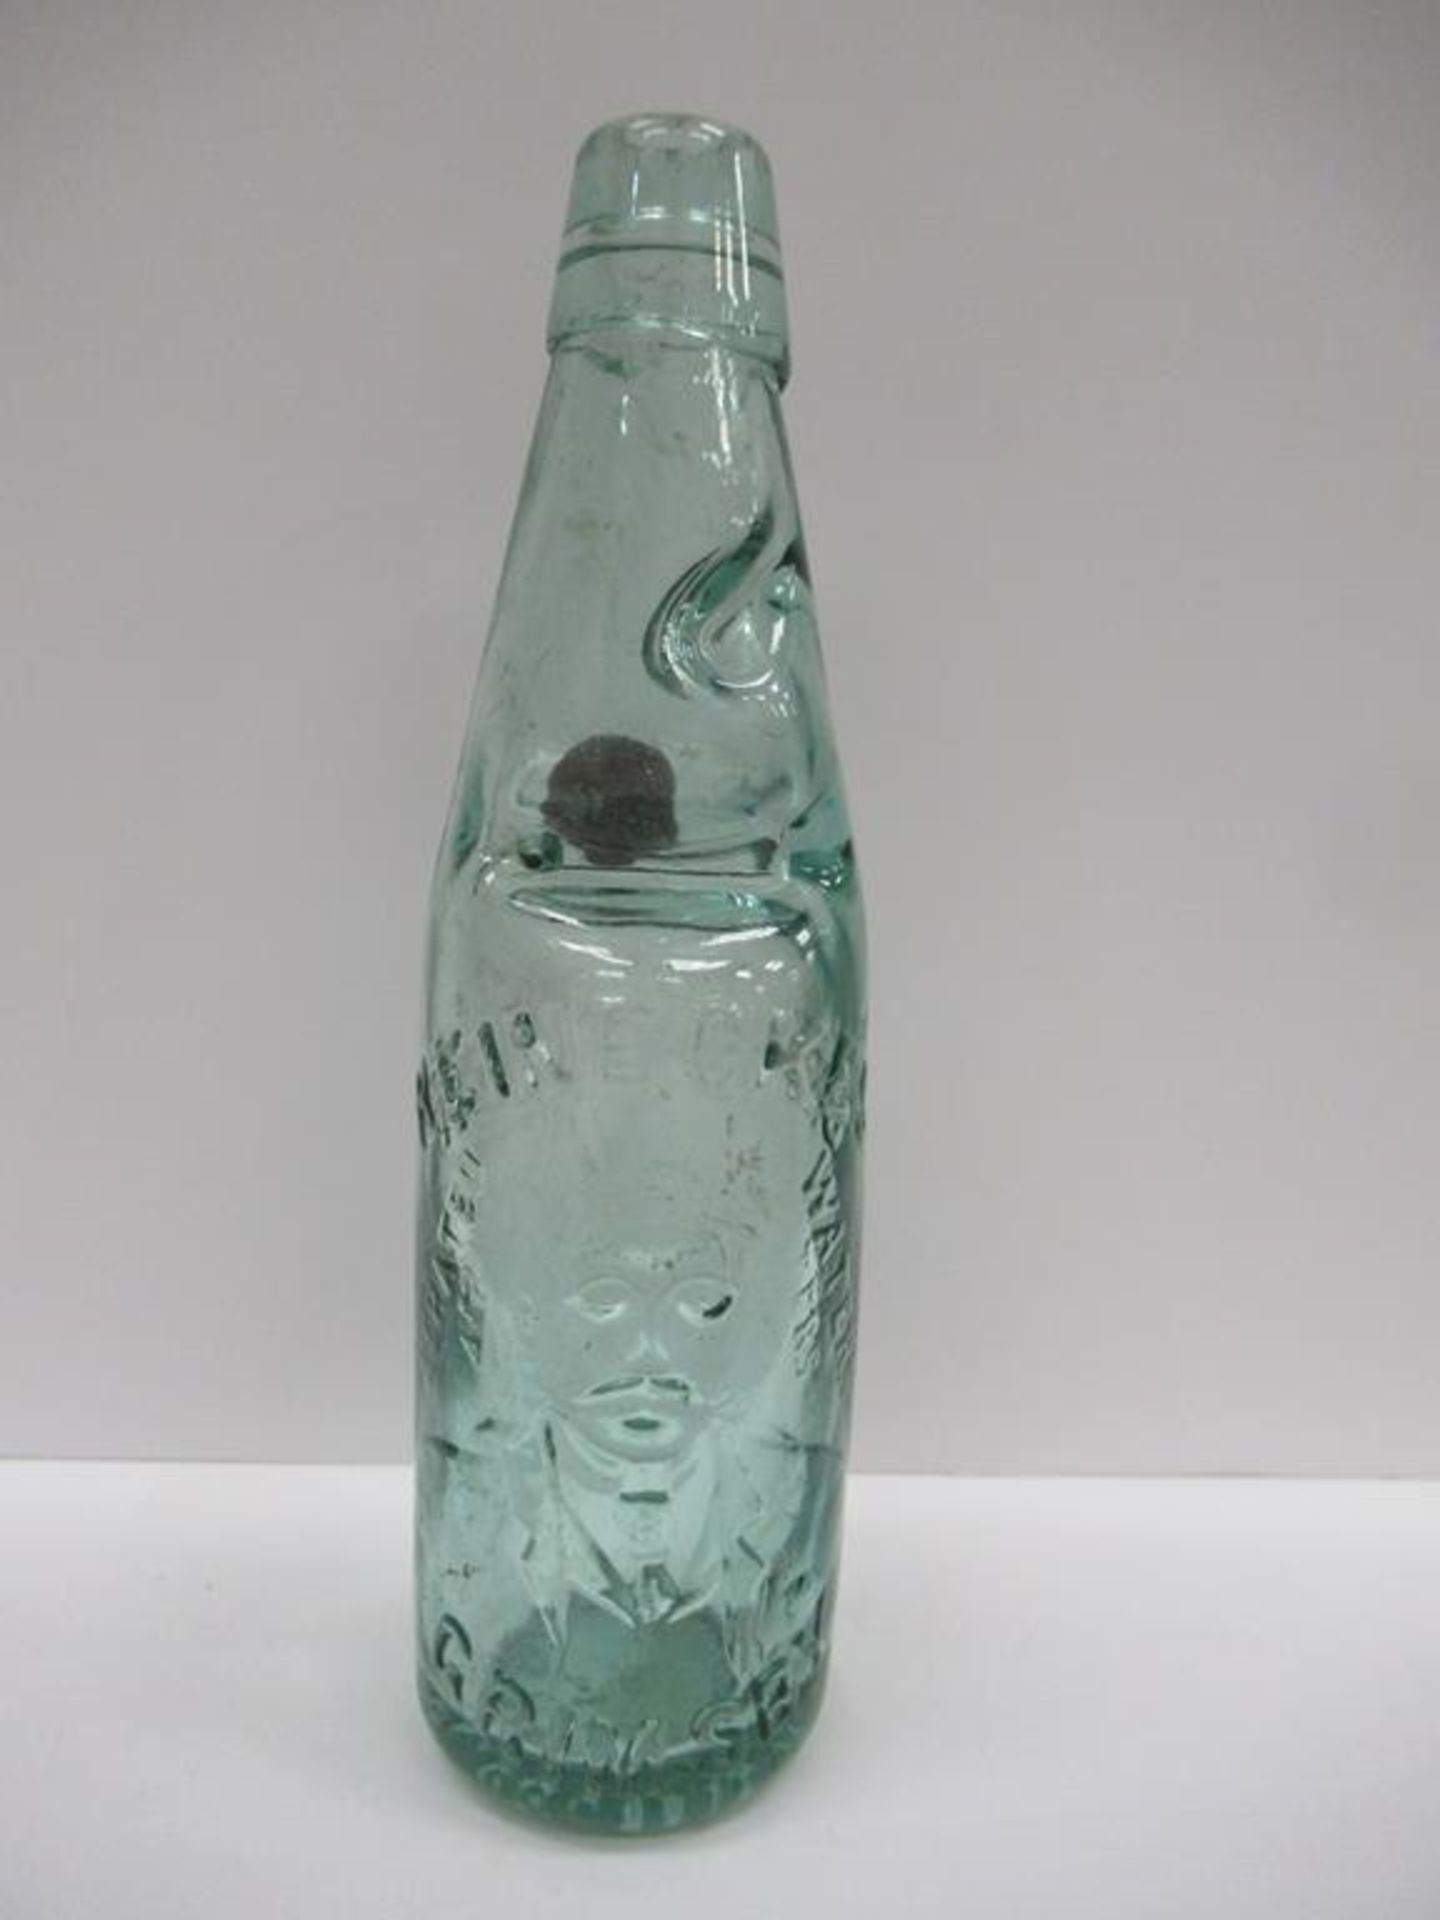 Grimsby Reinecke's Aerated Waters codd bottle with coloured marble 10oz